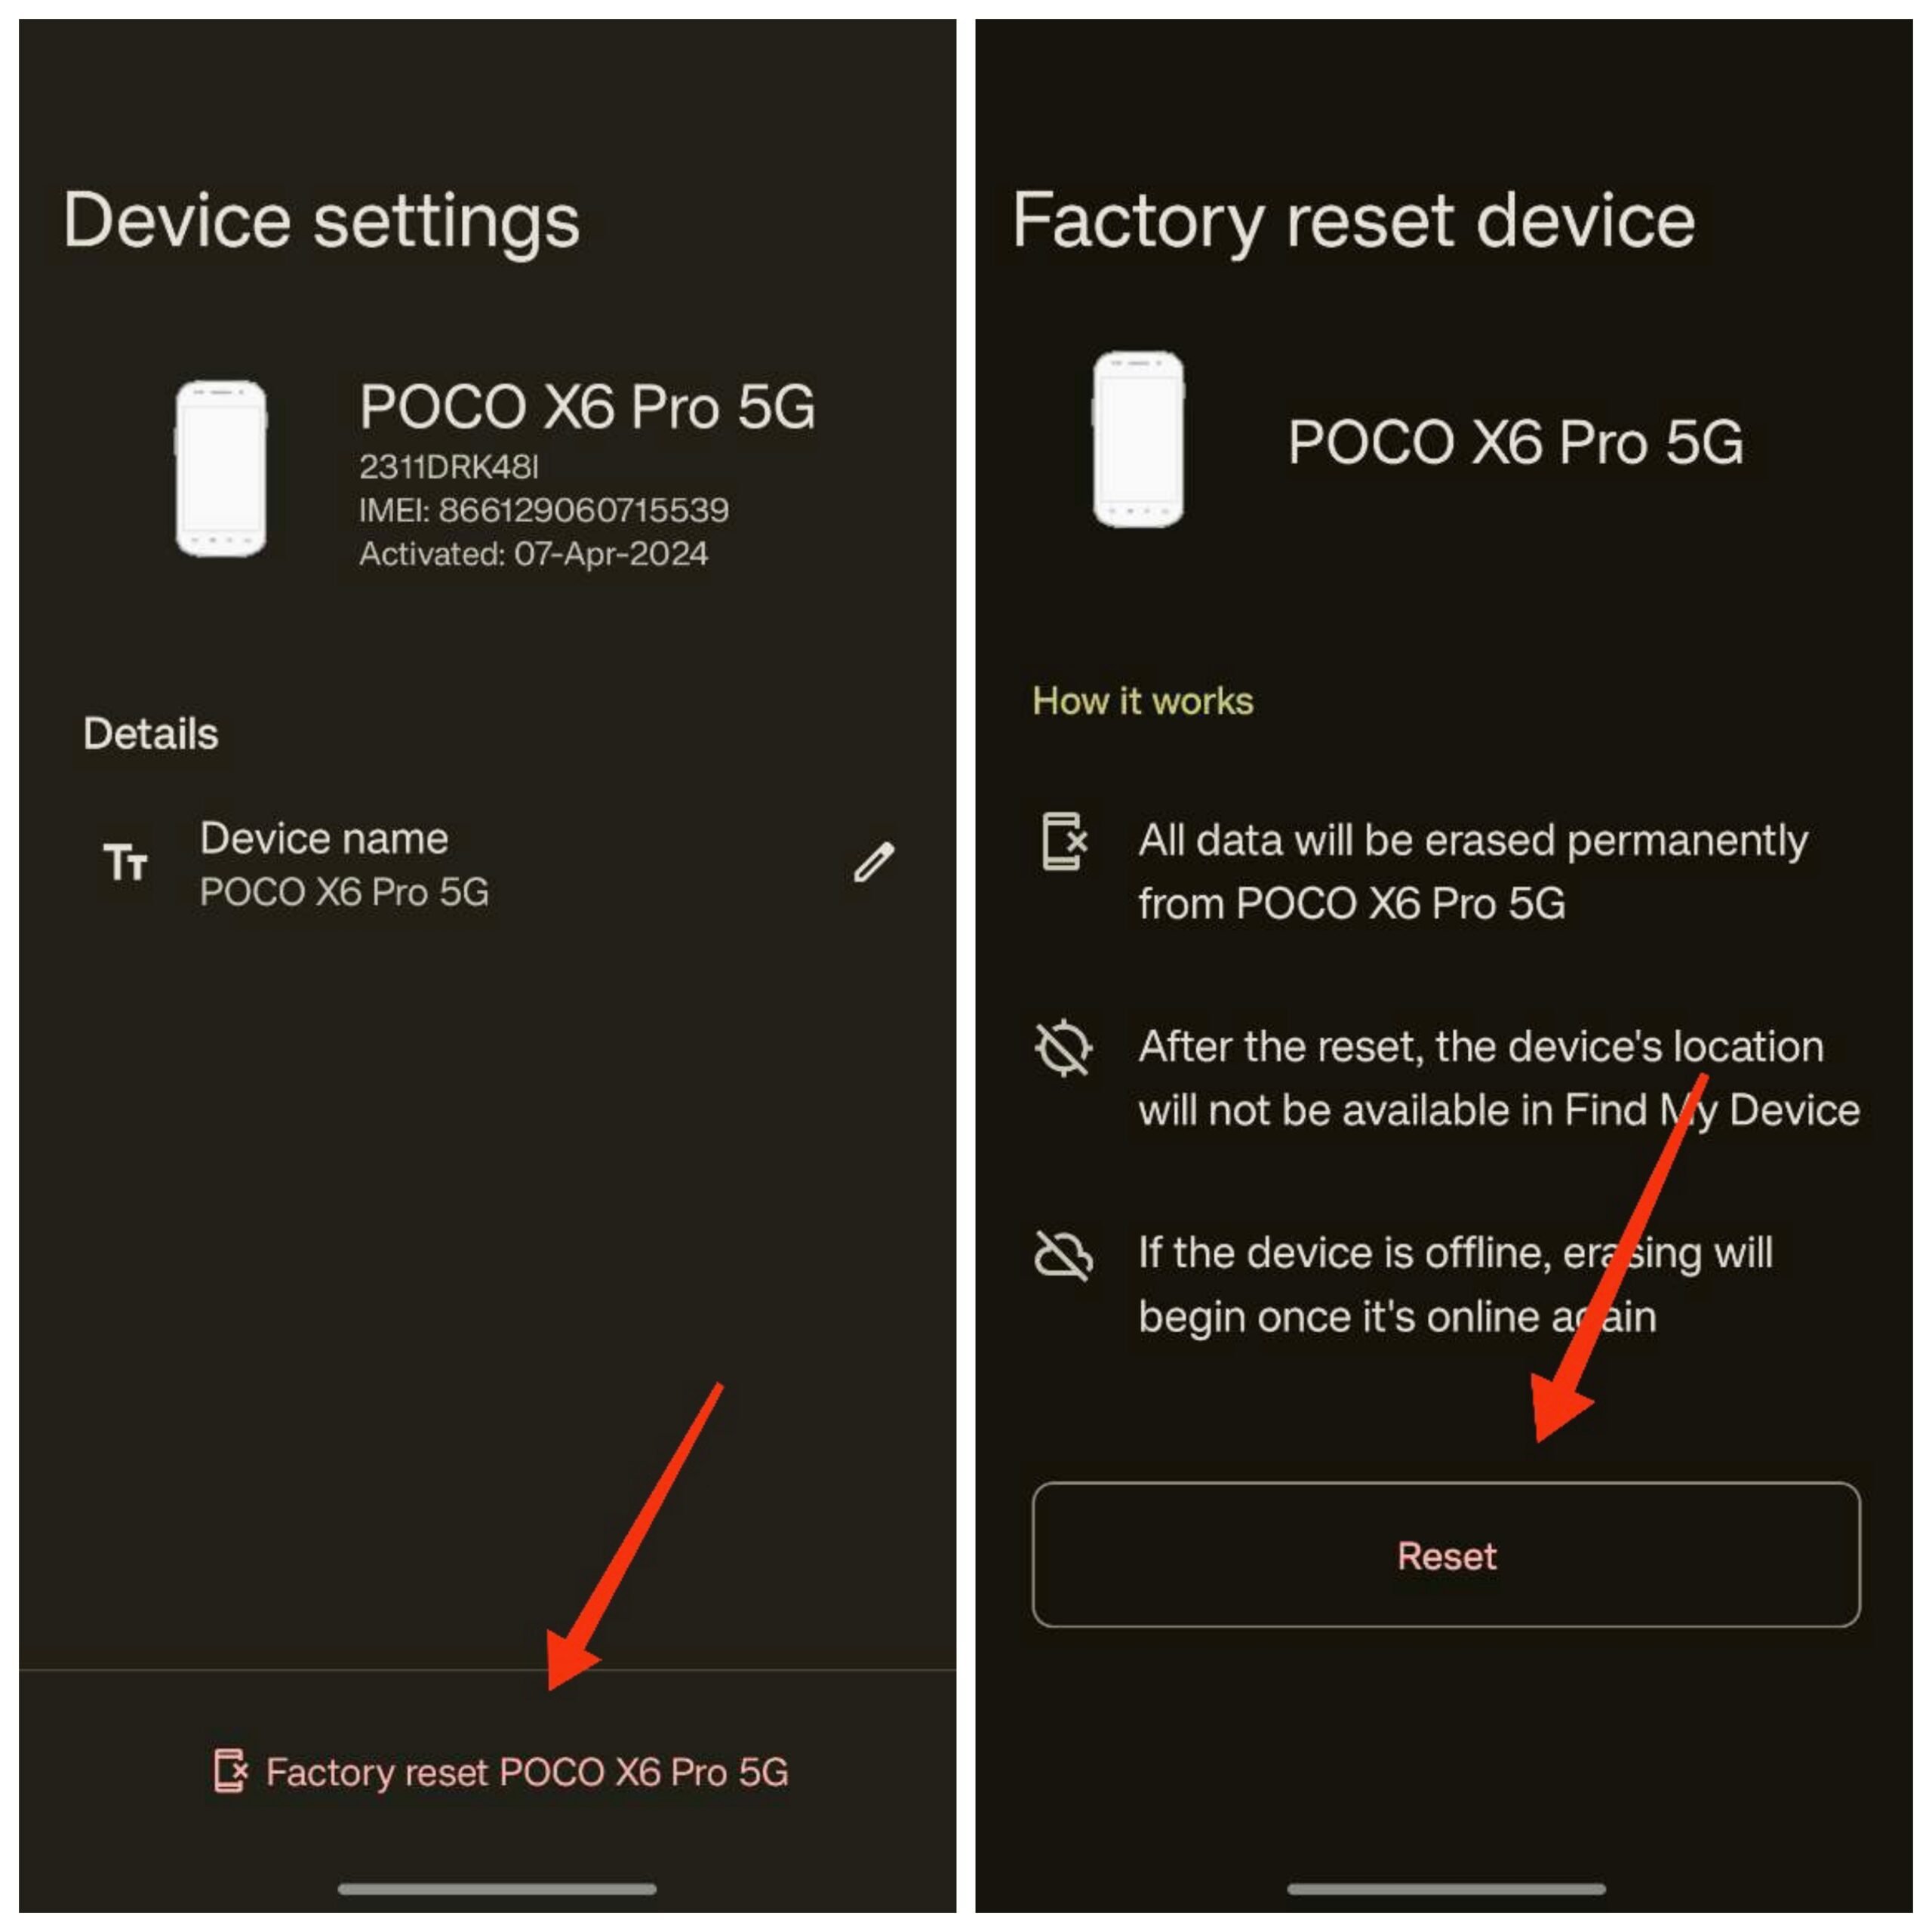 factory-reset-phone-using-the-Find-My-Device-app-scaled-1